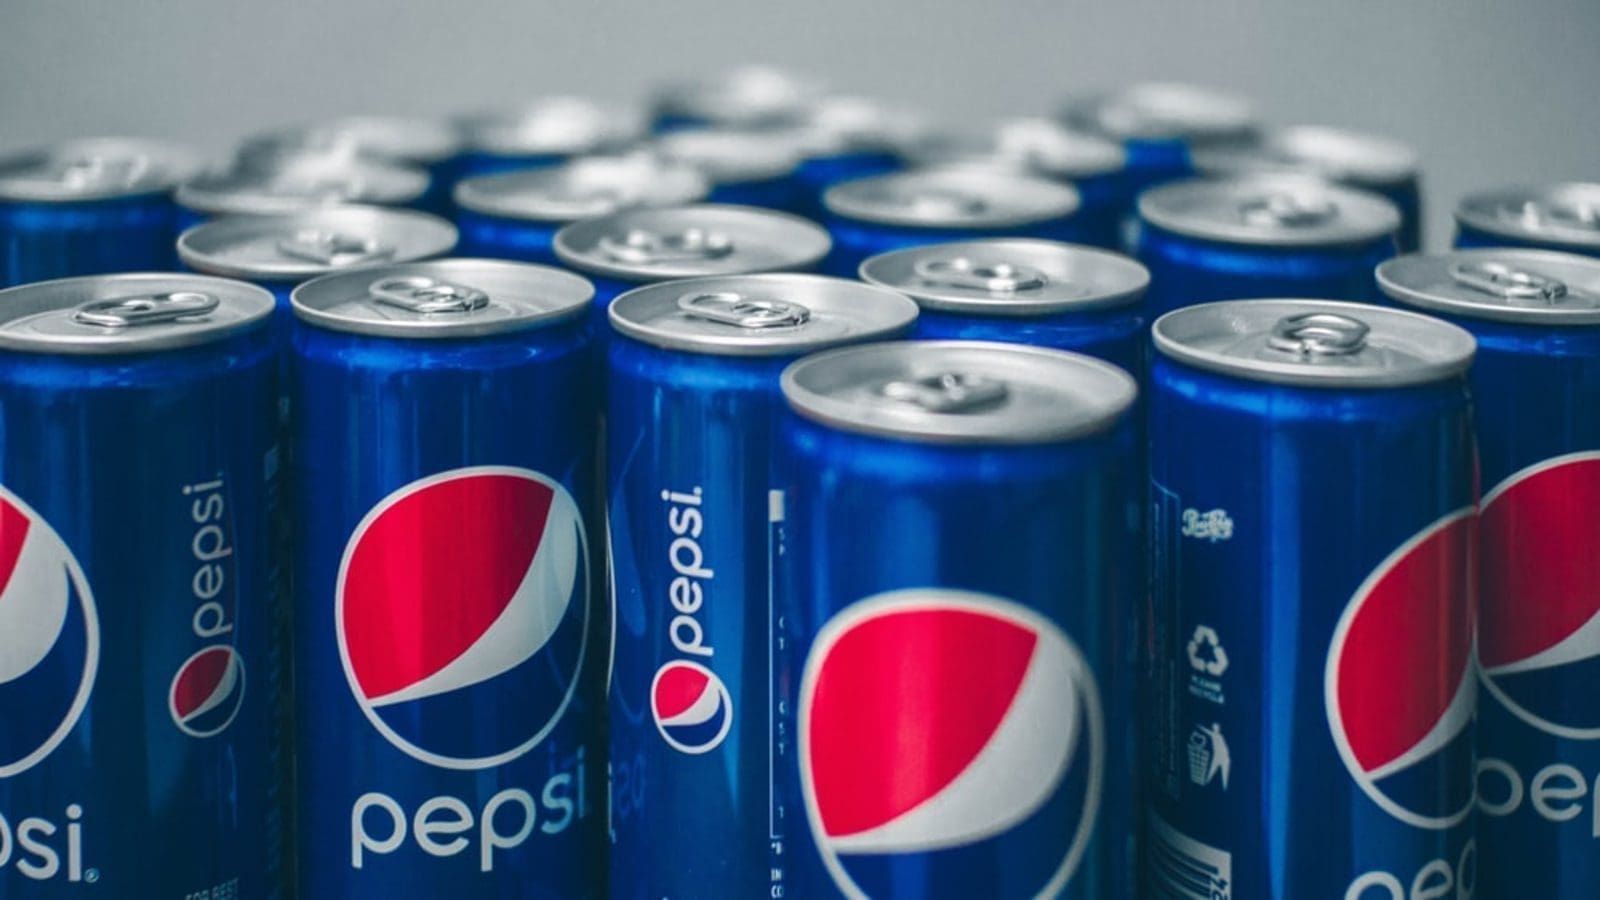 PepsiCo raises annual revenue forecast, warns of potential price hikes as supply disruptions persist